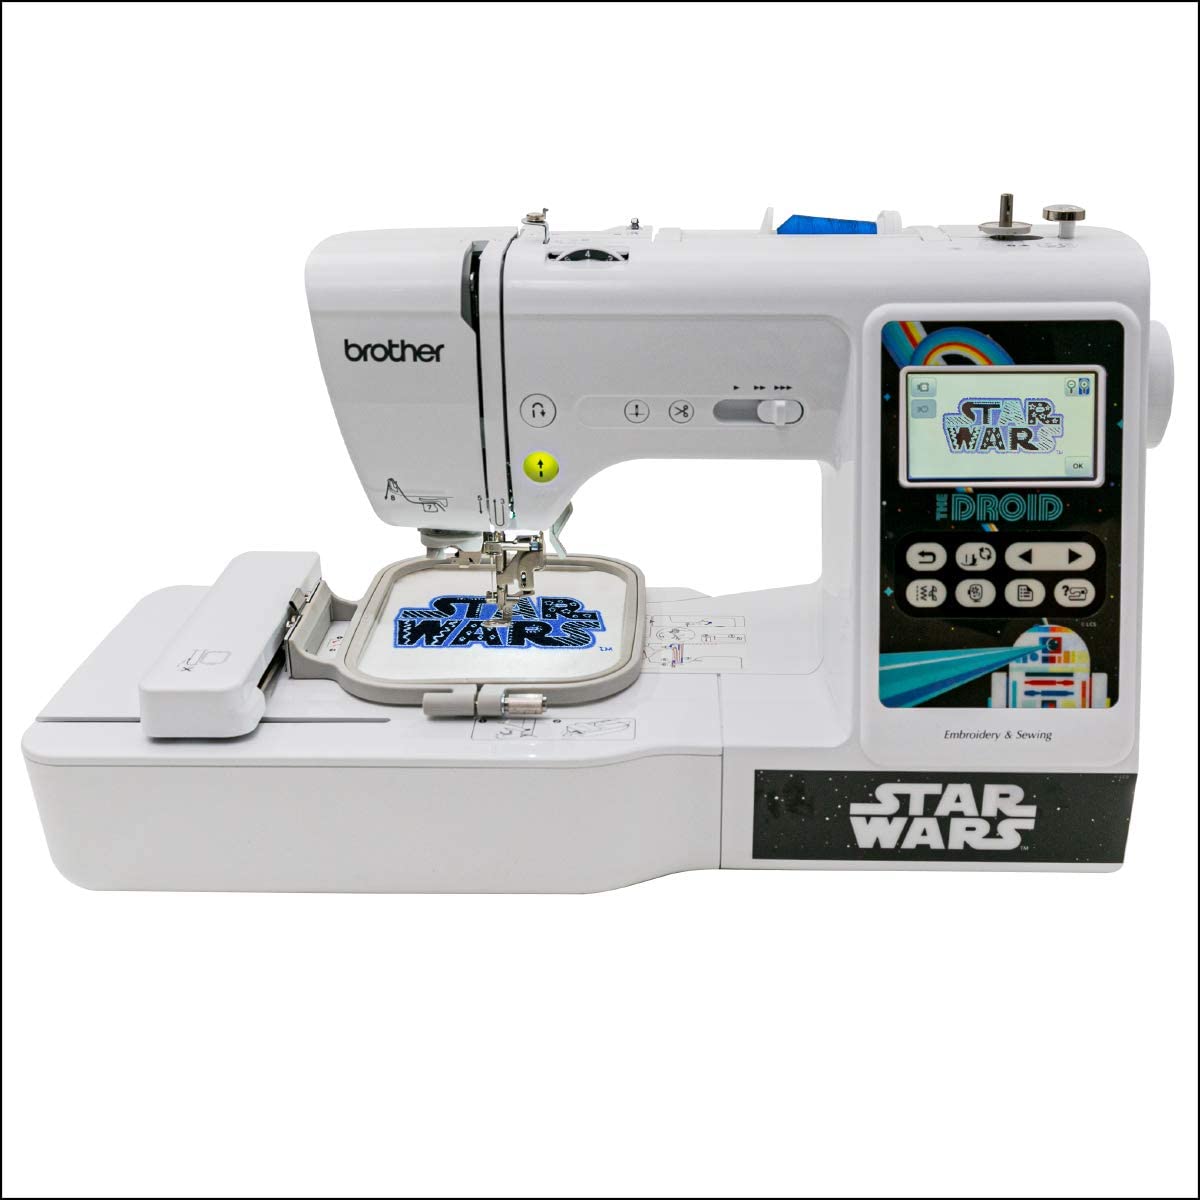 Brother Sewing and Embroidery Machine, 4 Star Wars Faceplates, 10 Downloadable Star Wars Designs, 80 Designs, 103 Built-In Stitches